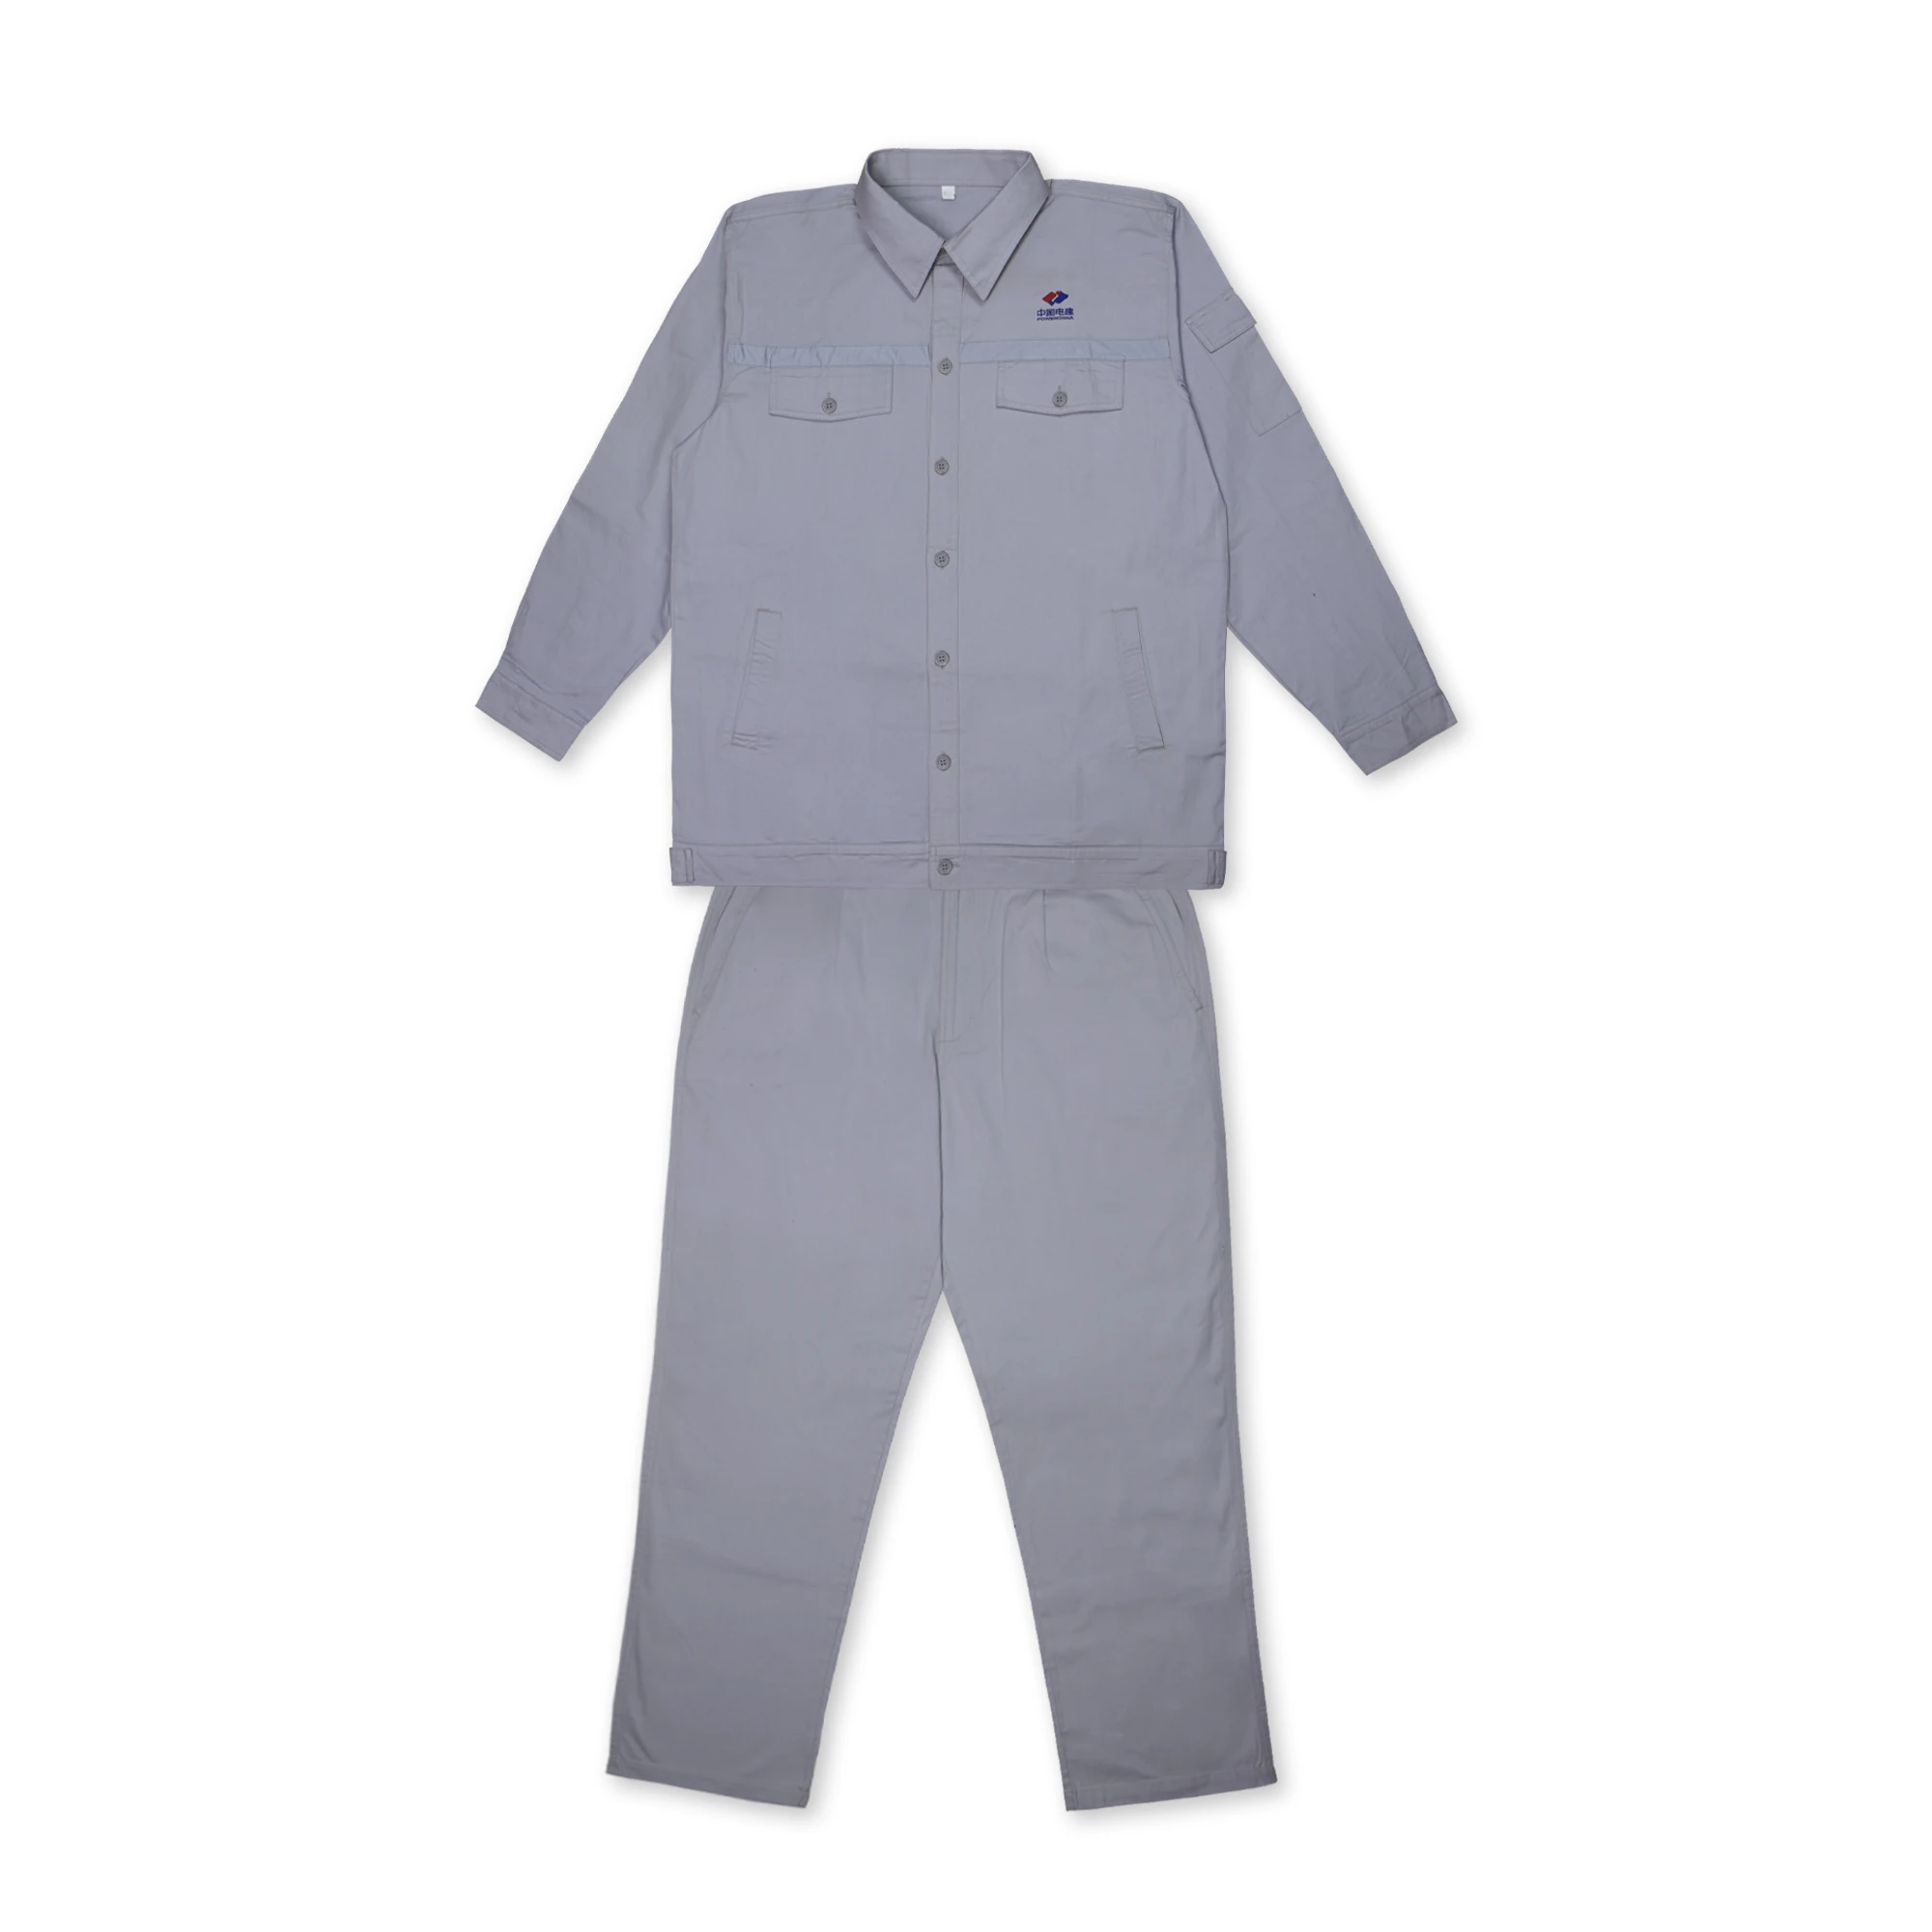 Workwear For Medical Construction Workers Uniform Customizable Danger ...